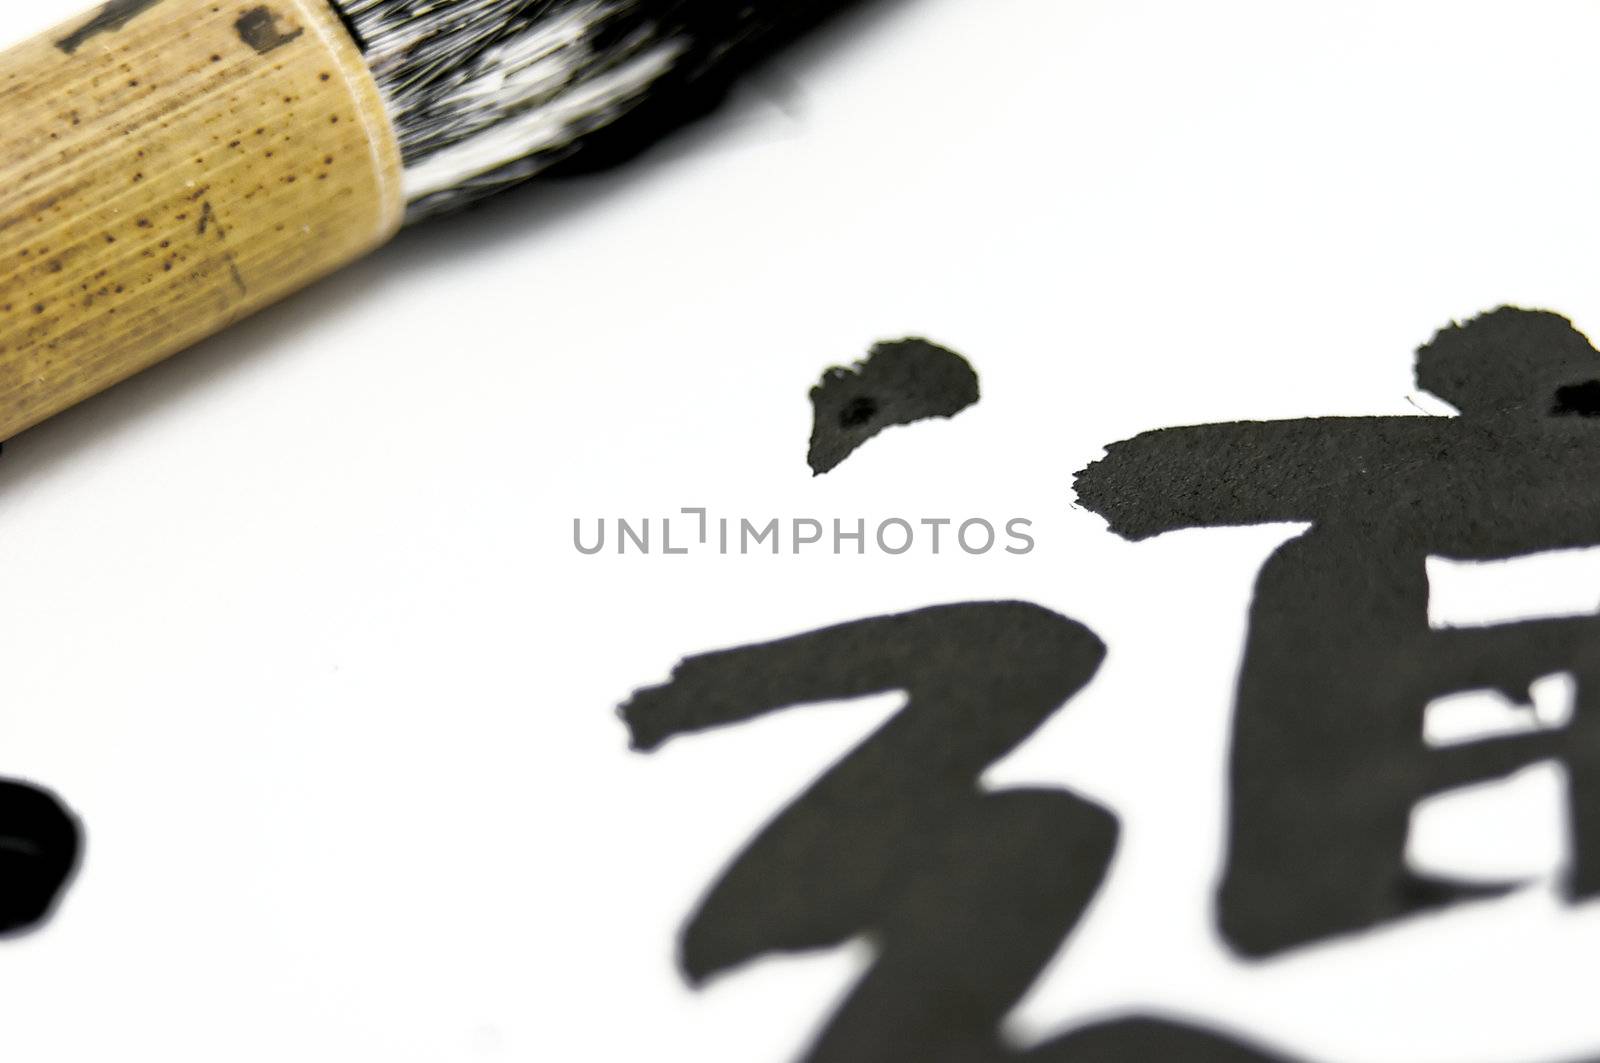 Black chinese/japanese symbol with a calligraphy brush resting nearby. This is a close macro shot with very low depth of field. The japanese form is pronounced DO and means The Way.